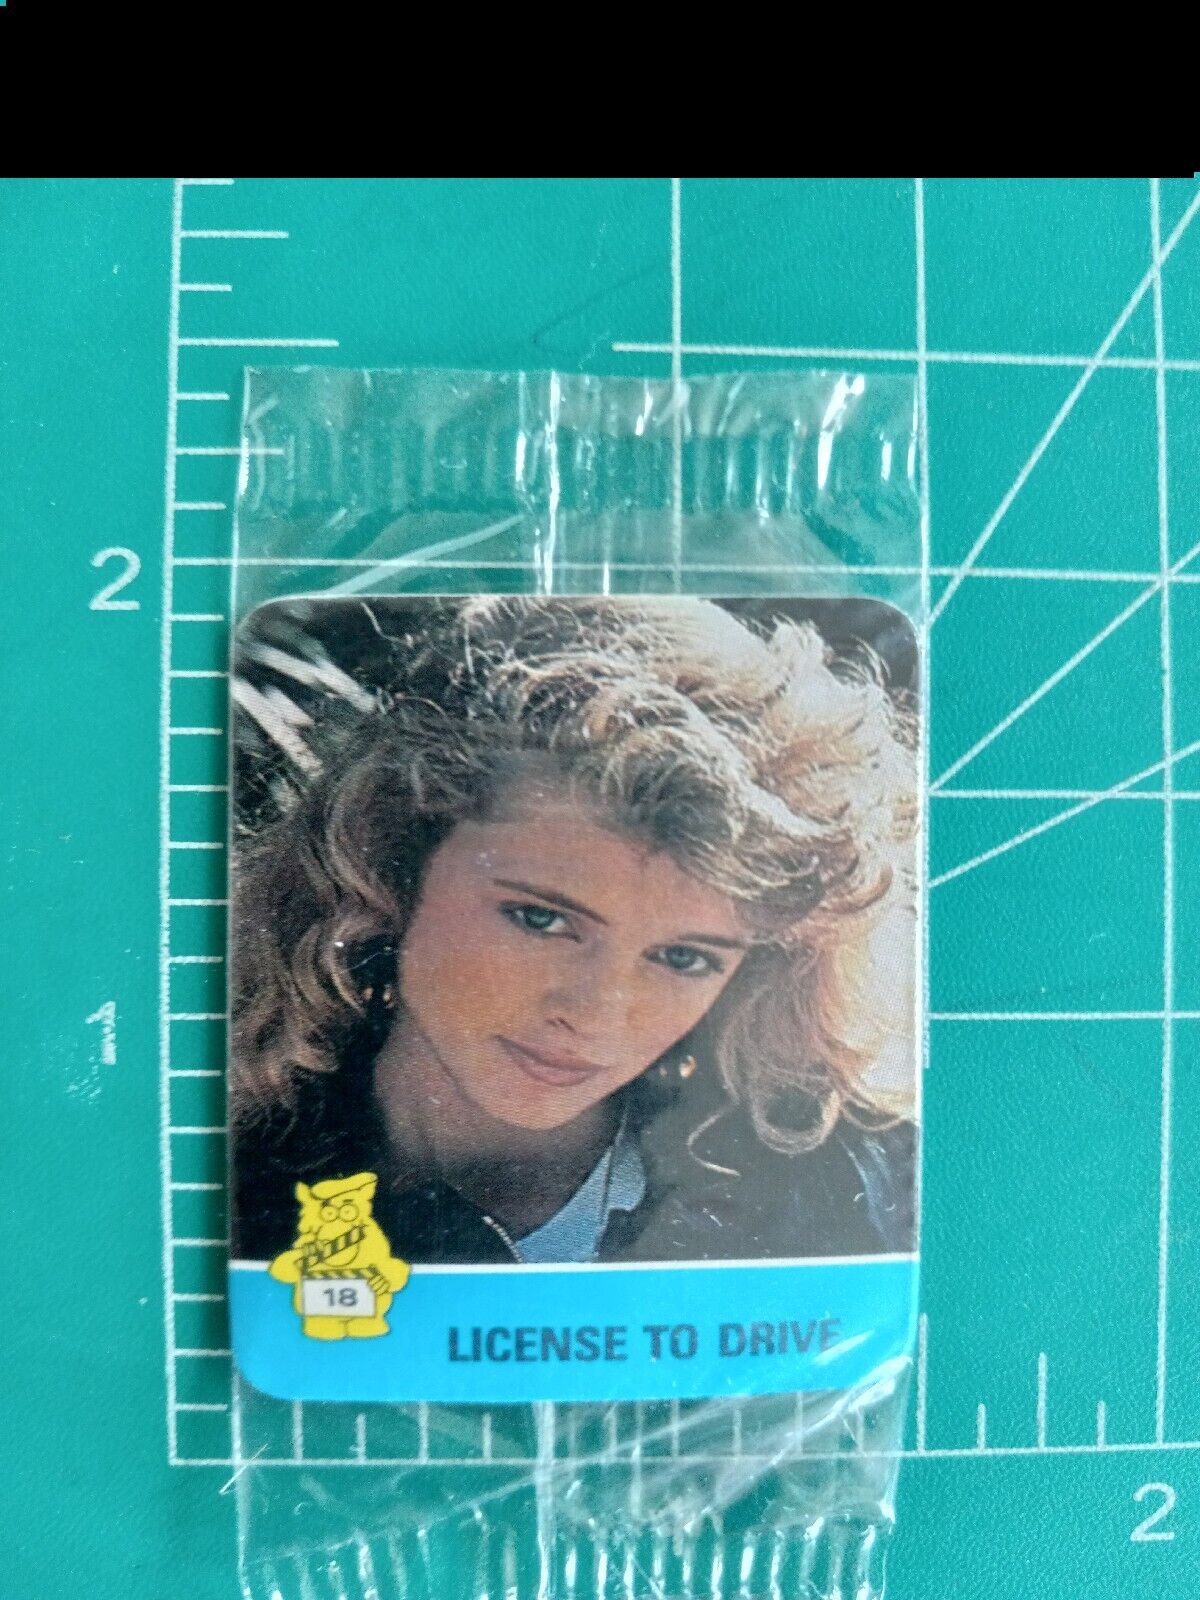 1988 HOSTESS LICENSE TO DRIVE movie star actor Card HEATHER GRAHAM #18